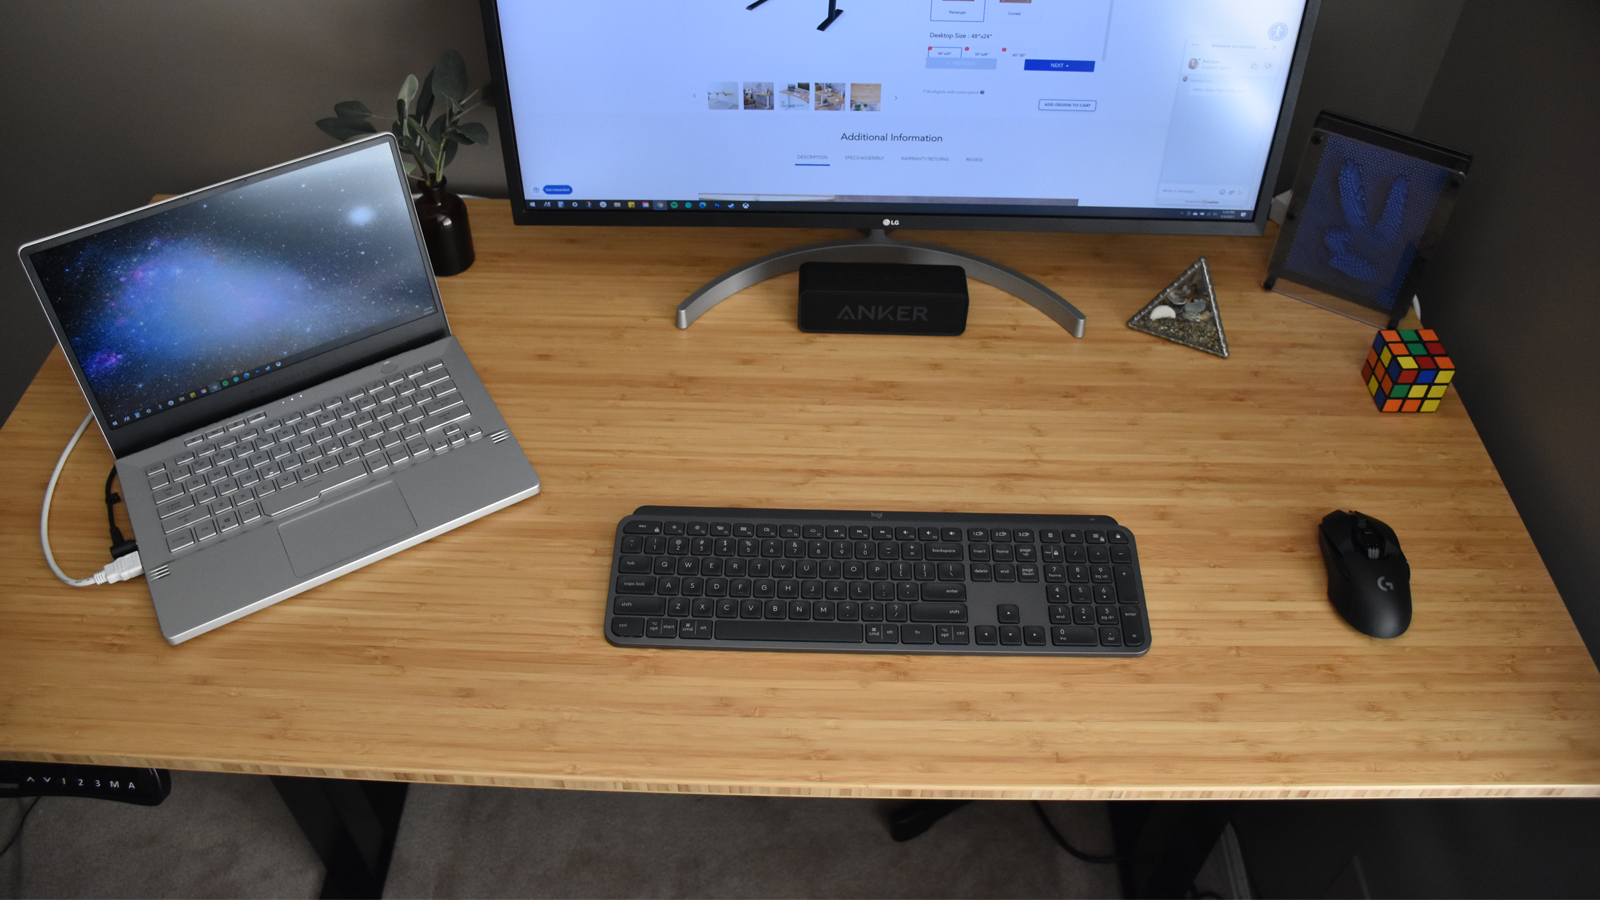 View of desk with laptop, monitor, keyboard, mouse, and other trinkets on it